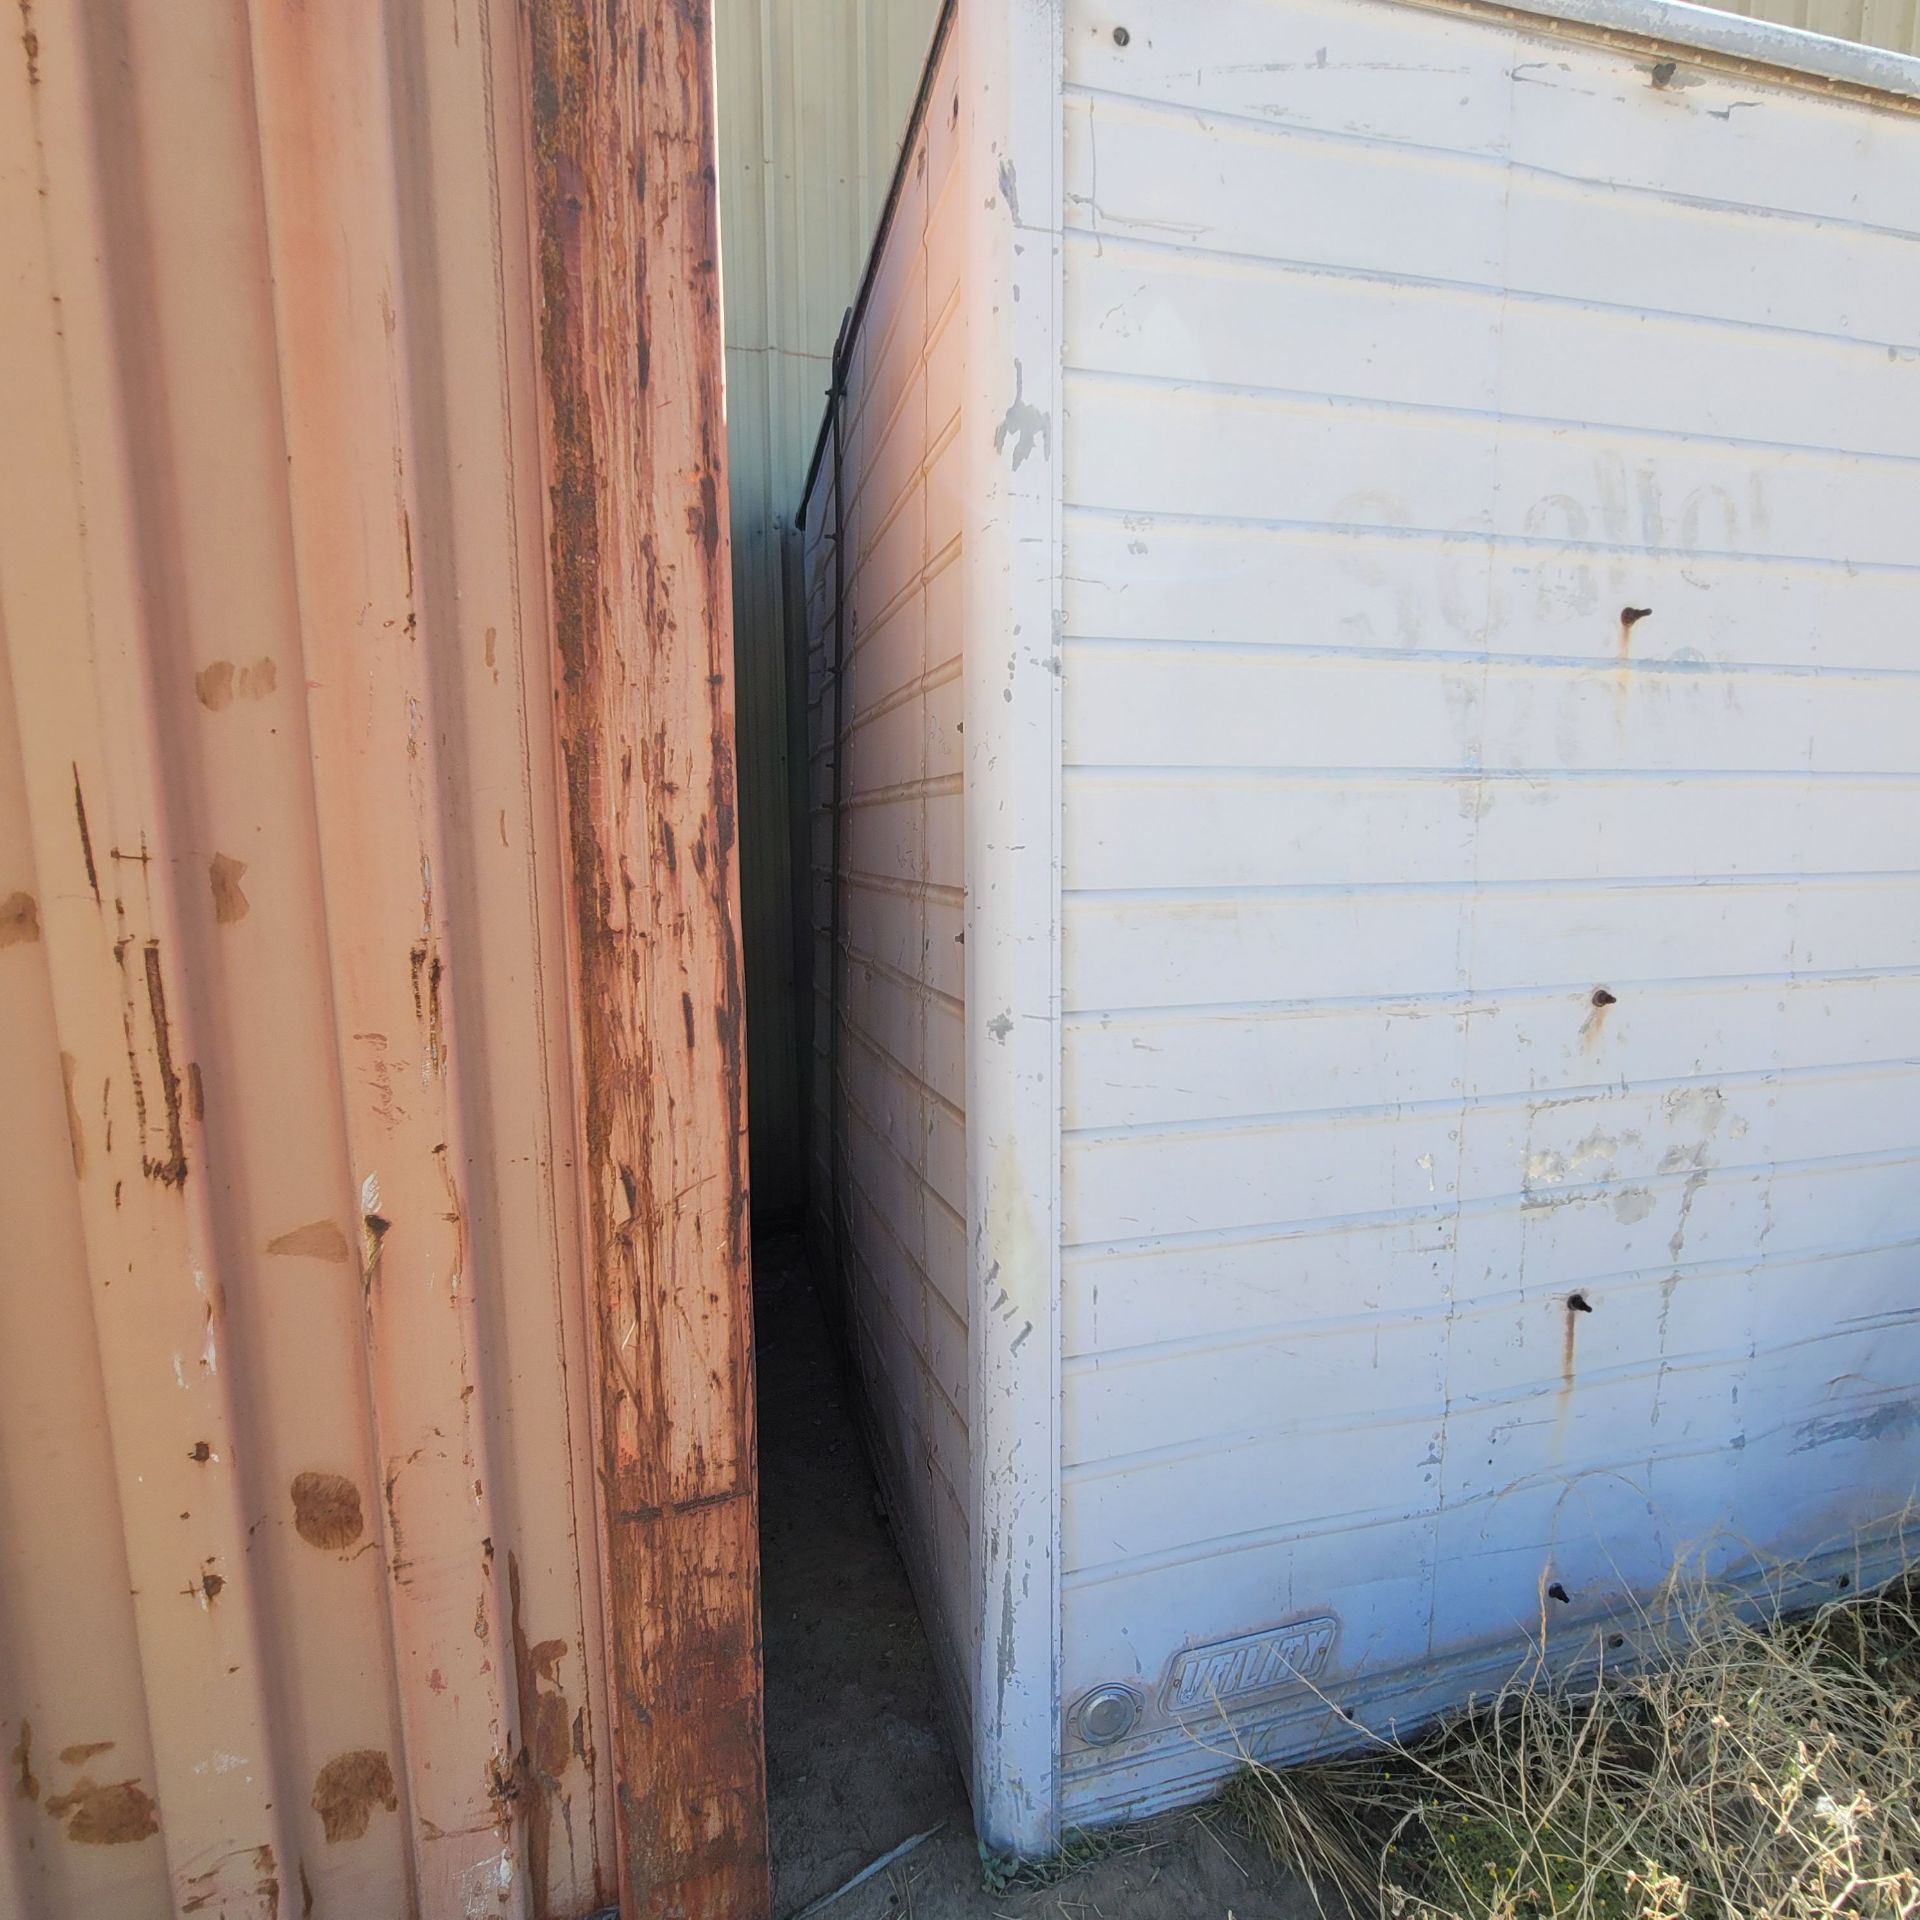 UTILITY 16' CONTAINER, MISSING 1/3 OF SHEATHING ON ONE SIDE, SEE PHOTOS - Image 5 of 5